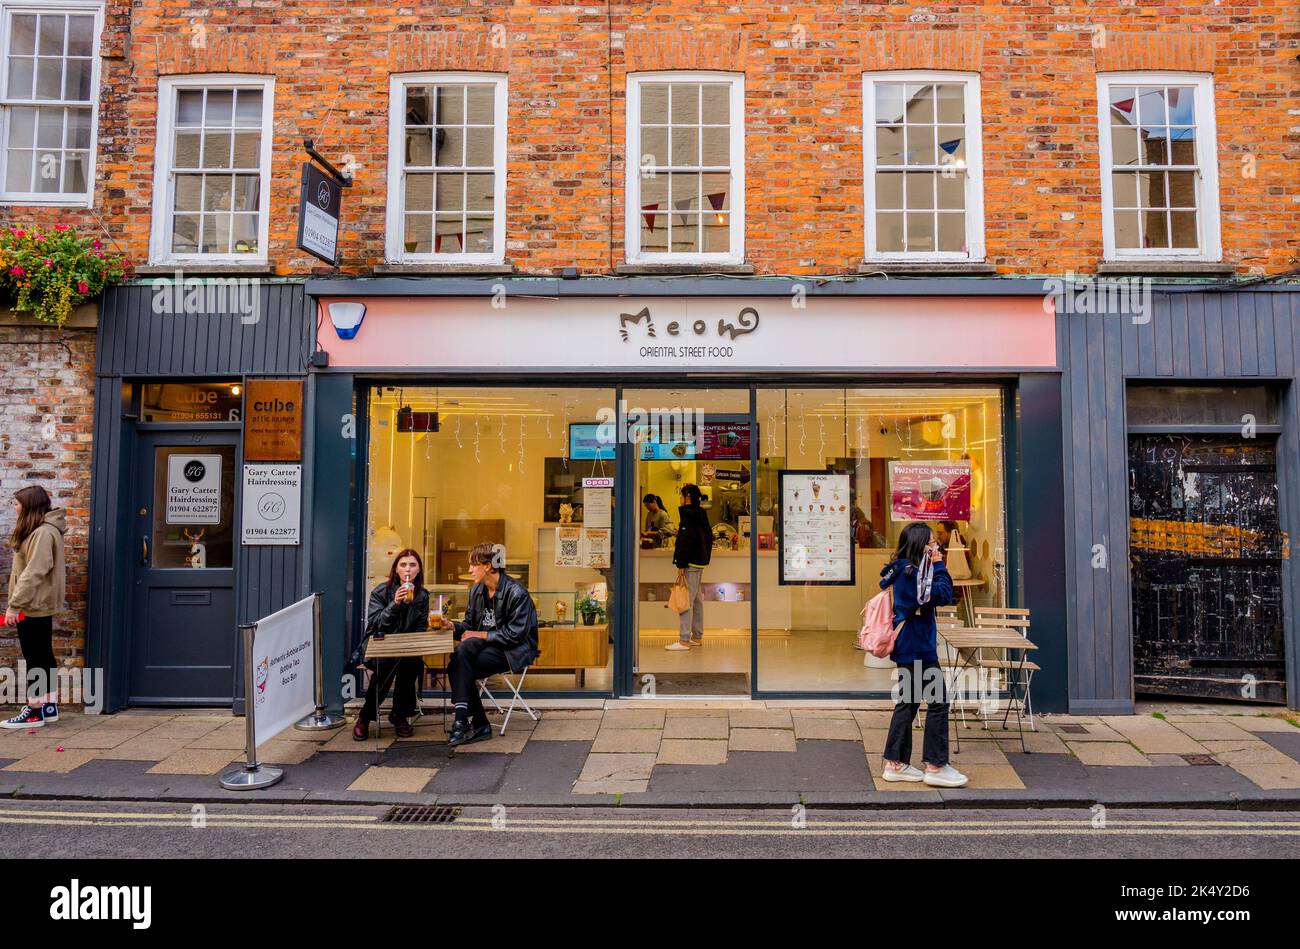 Meow and Bao fast street food restaurant serving oriental street food for sitting and take away customers in the center of York. Stock Photo